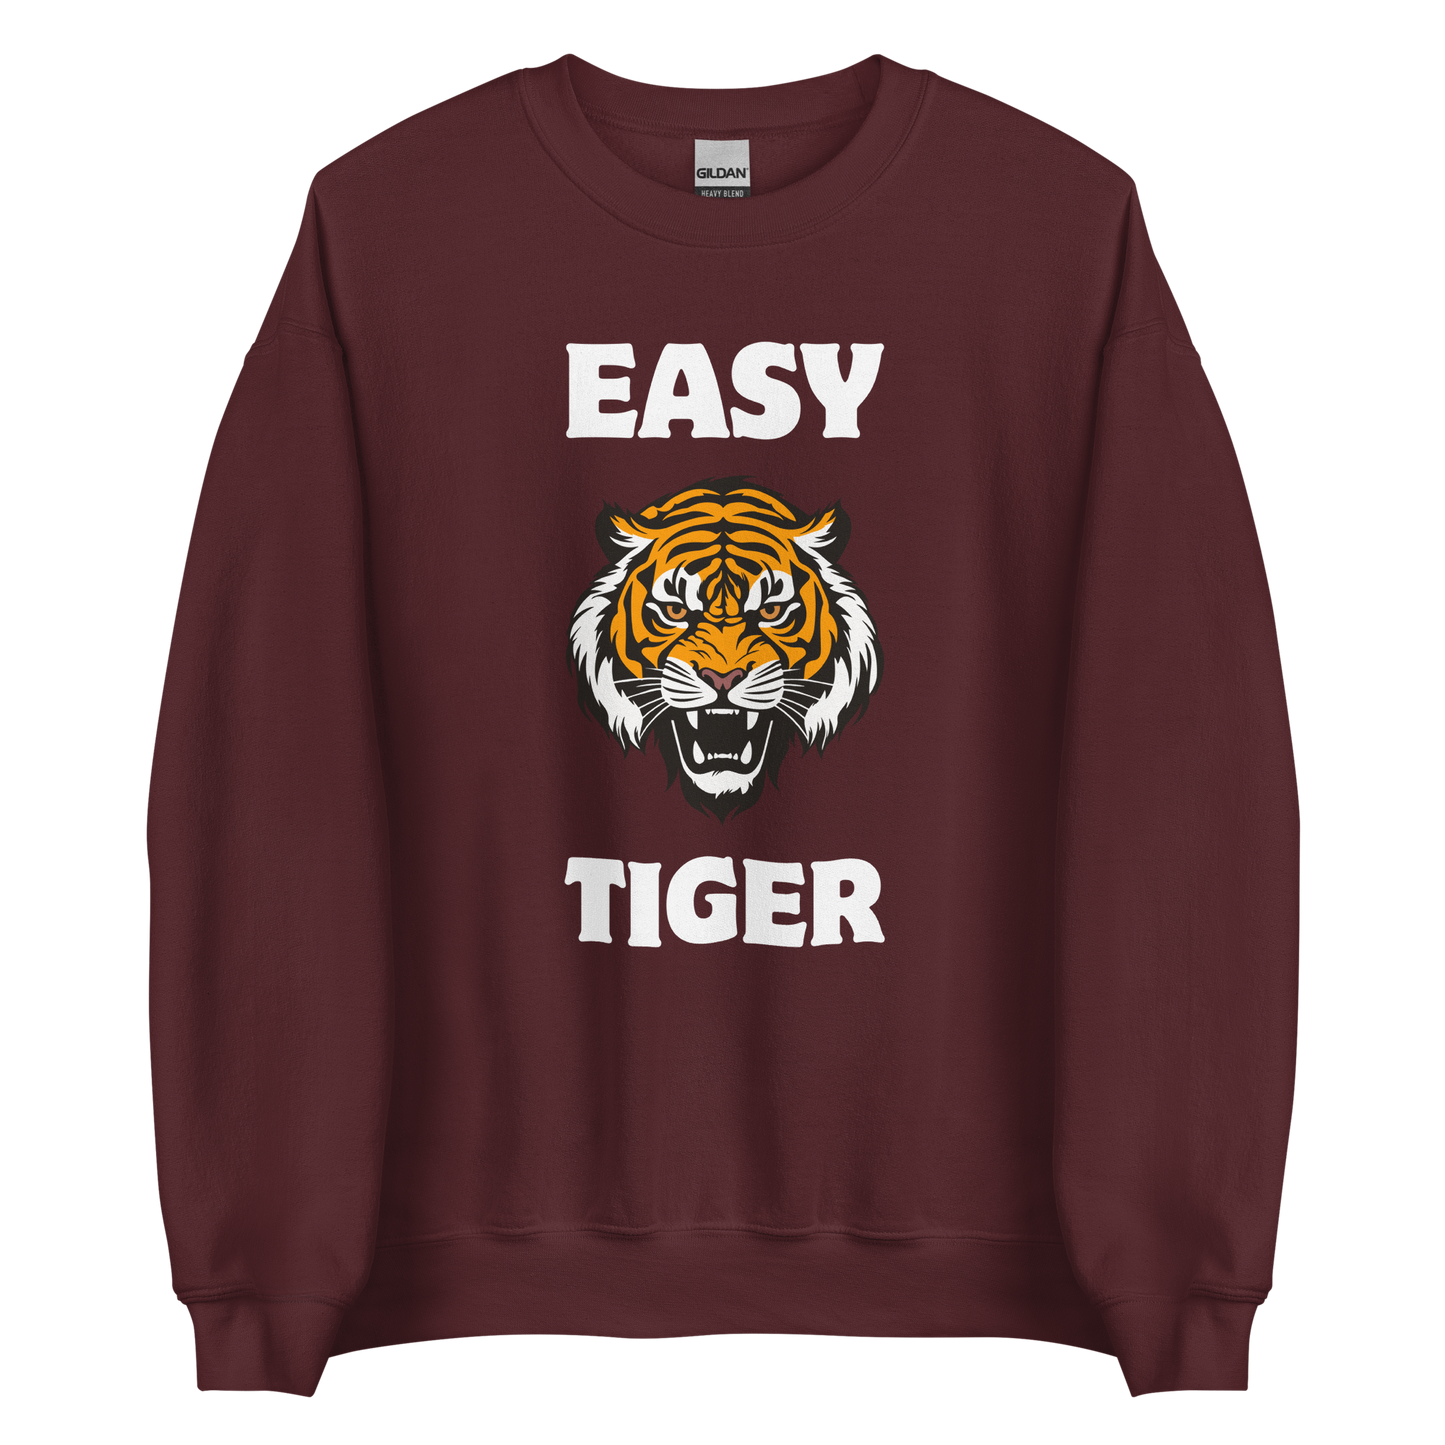 Maroon Tiger Sweatshirt featuring a Easy Tiger graphic on the chest - Funny Graphic Tiger Sweatshirts - Boozy Fox